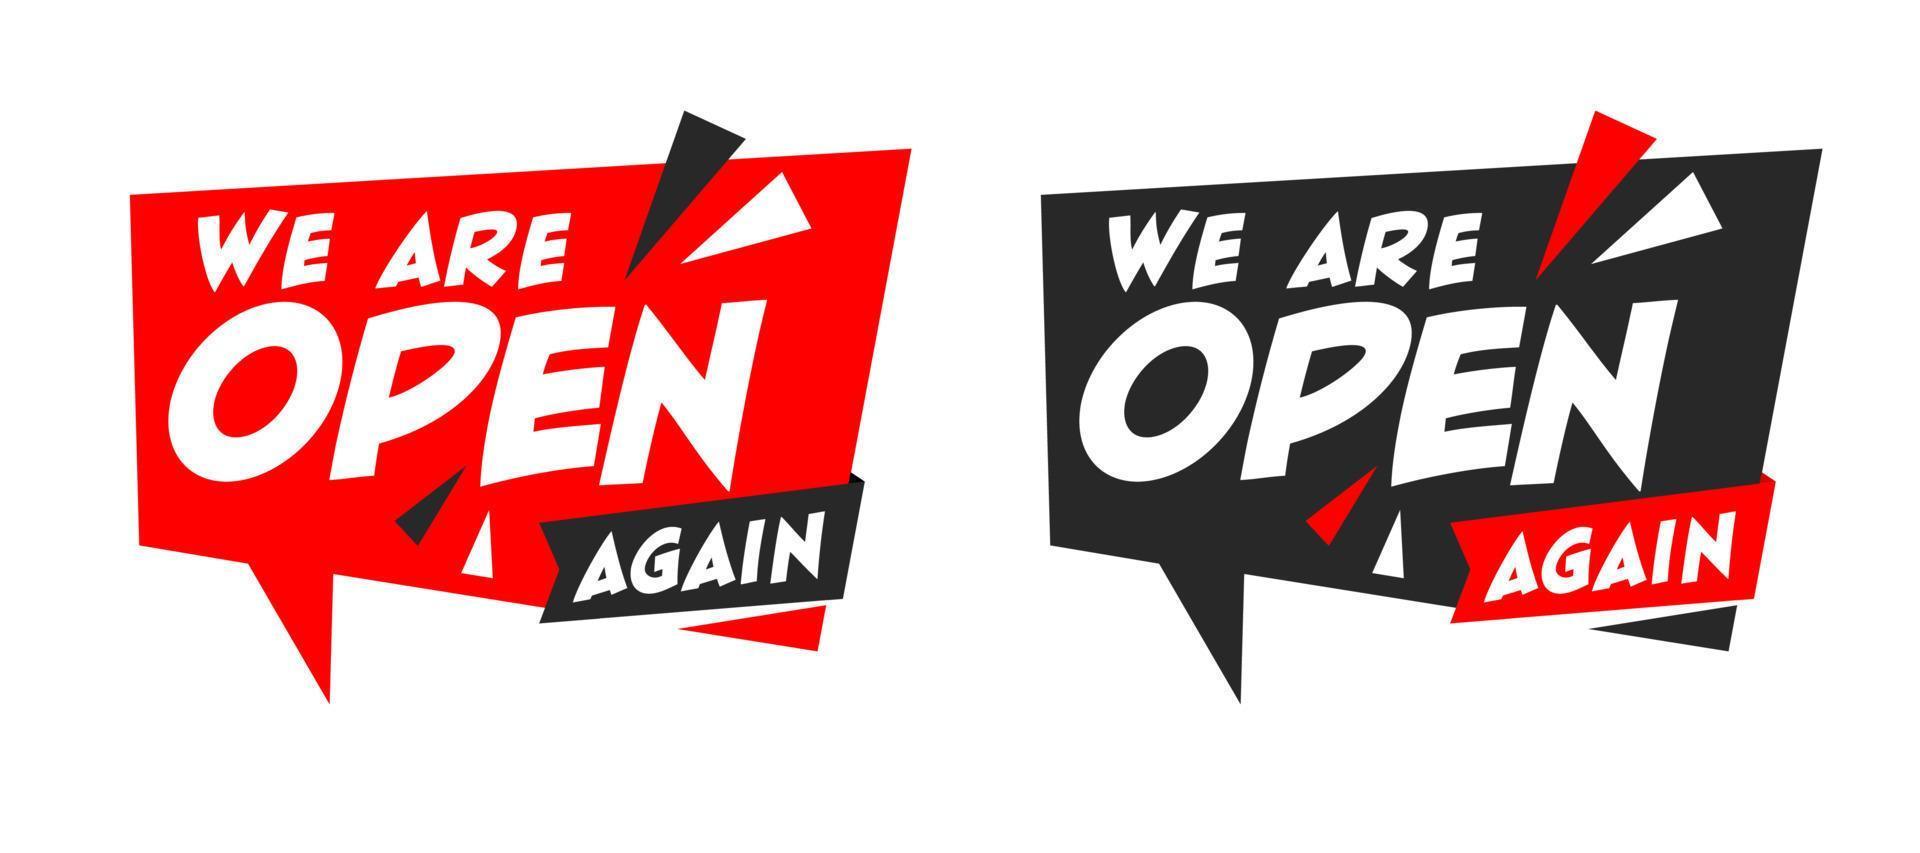 We Are Open Again Speech Bubble, Label or Sticker in Red and Black Color with Triangle Elements. vector